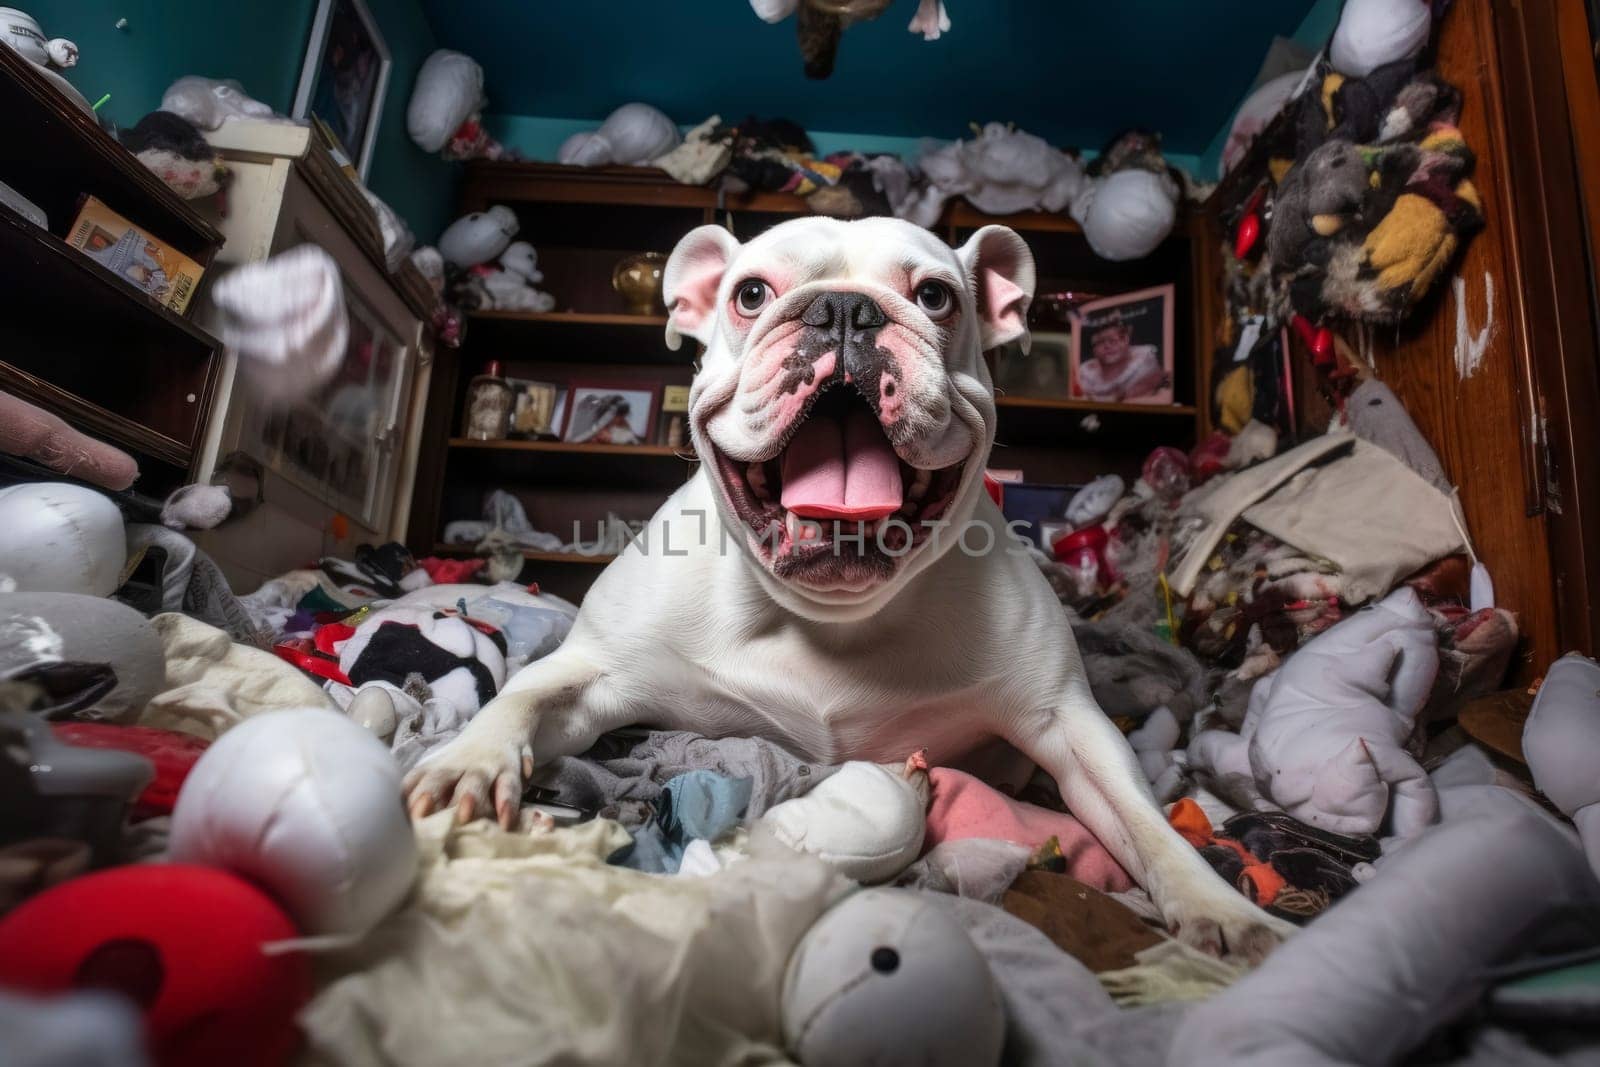 Wide-angle shot of a playful bulldog amidst a chaos of toys in a room